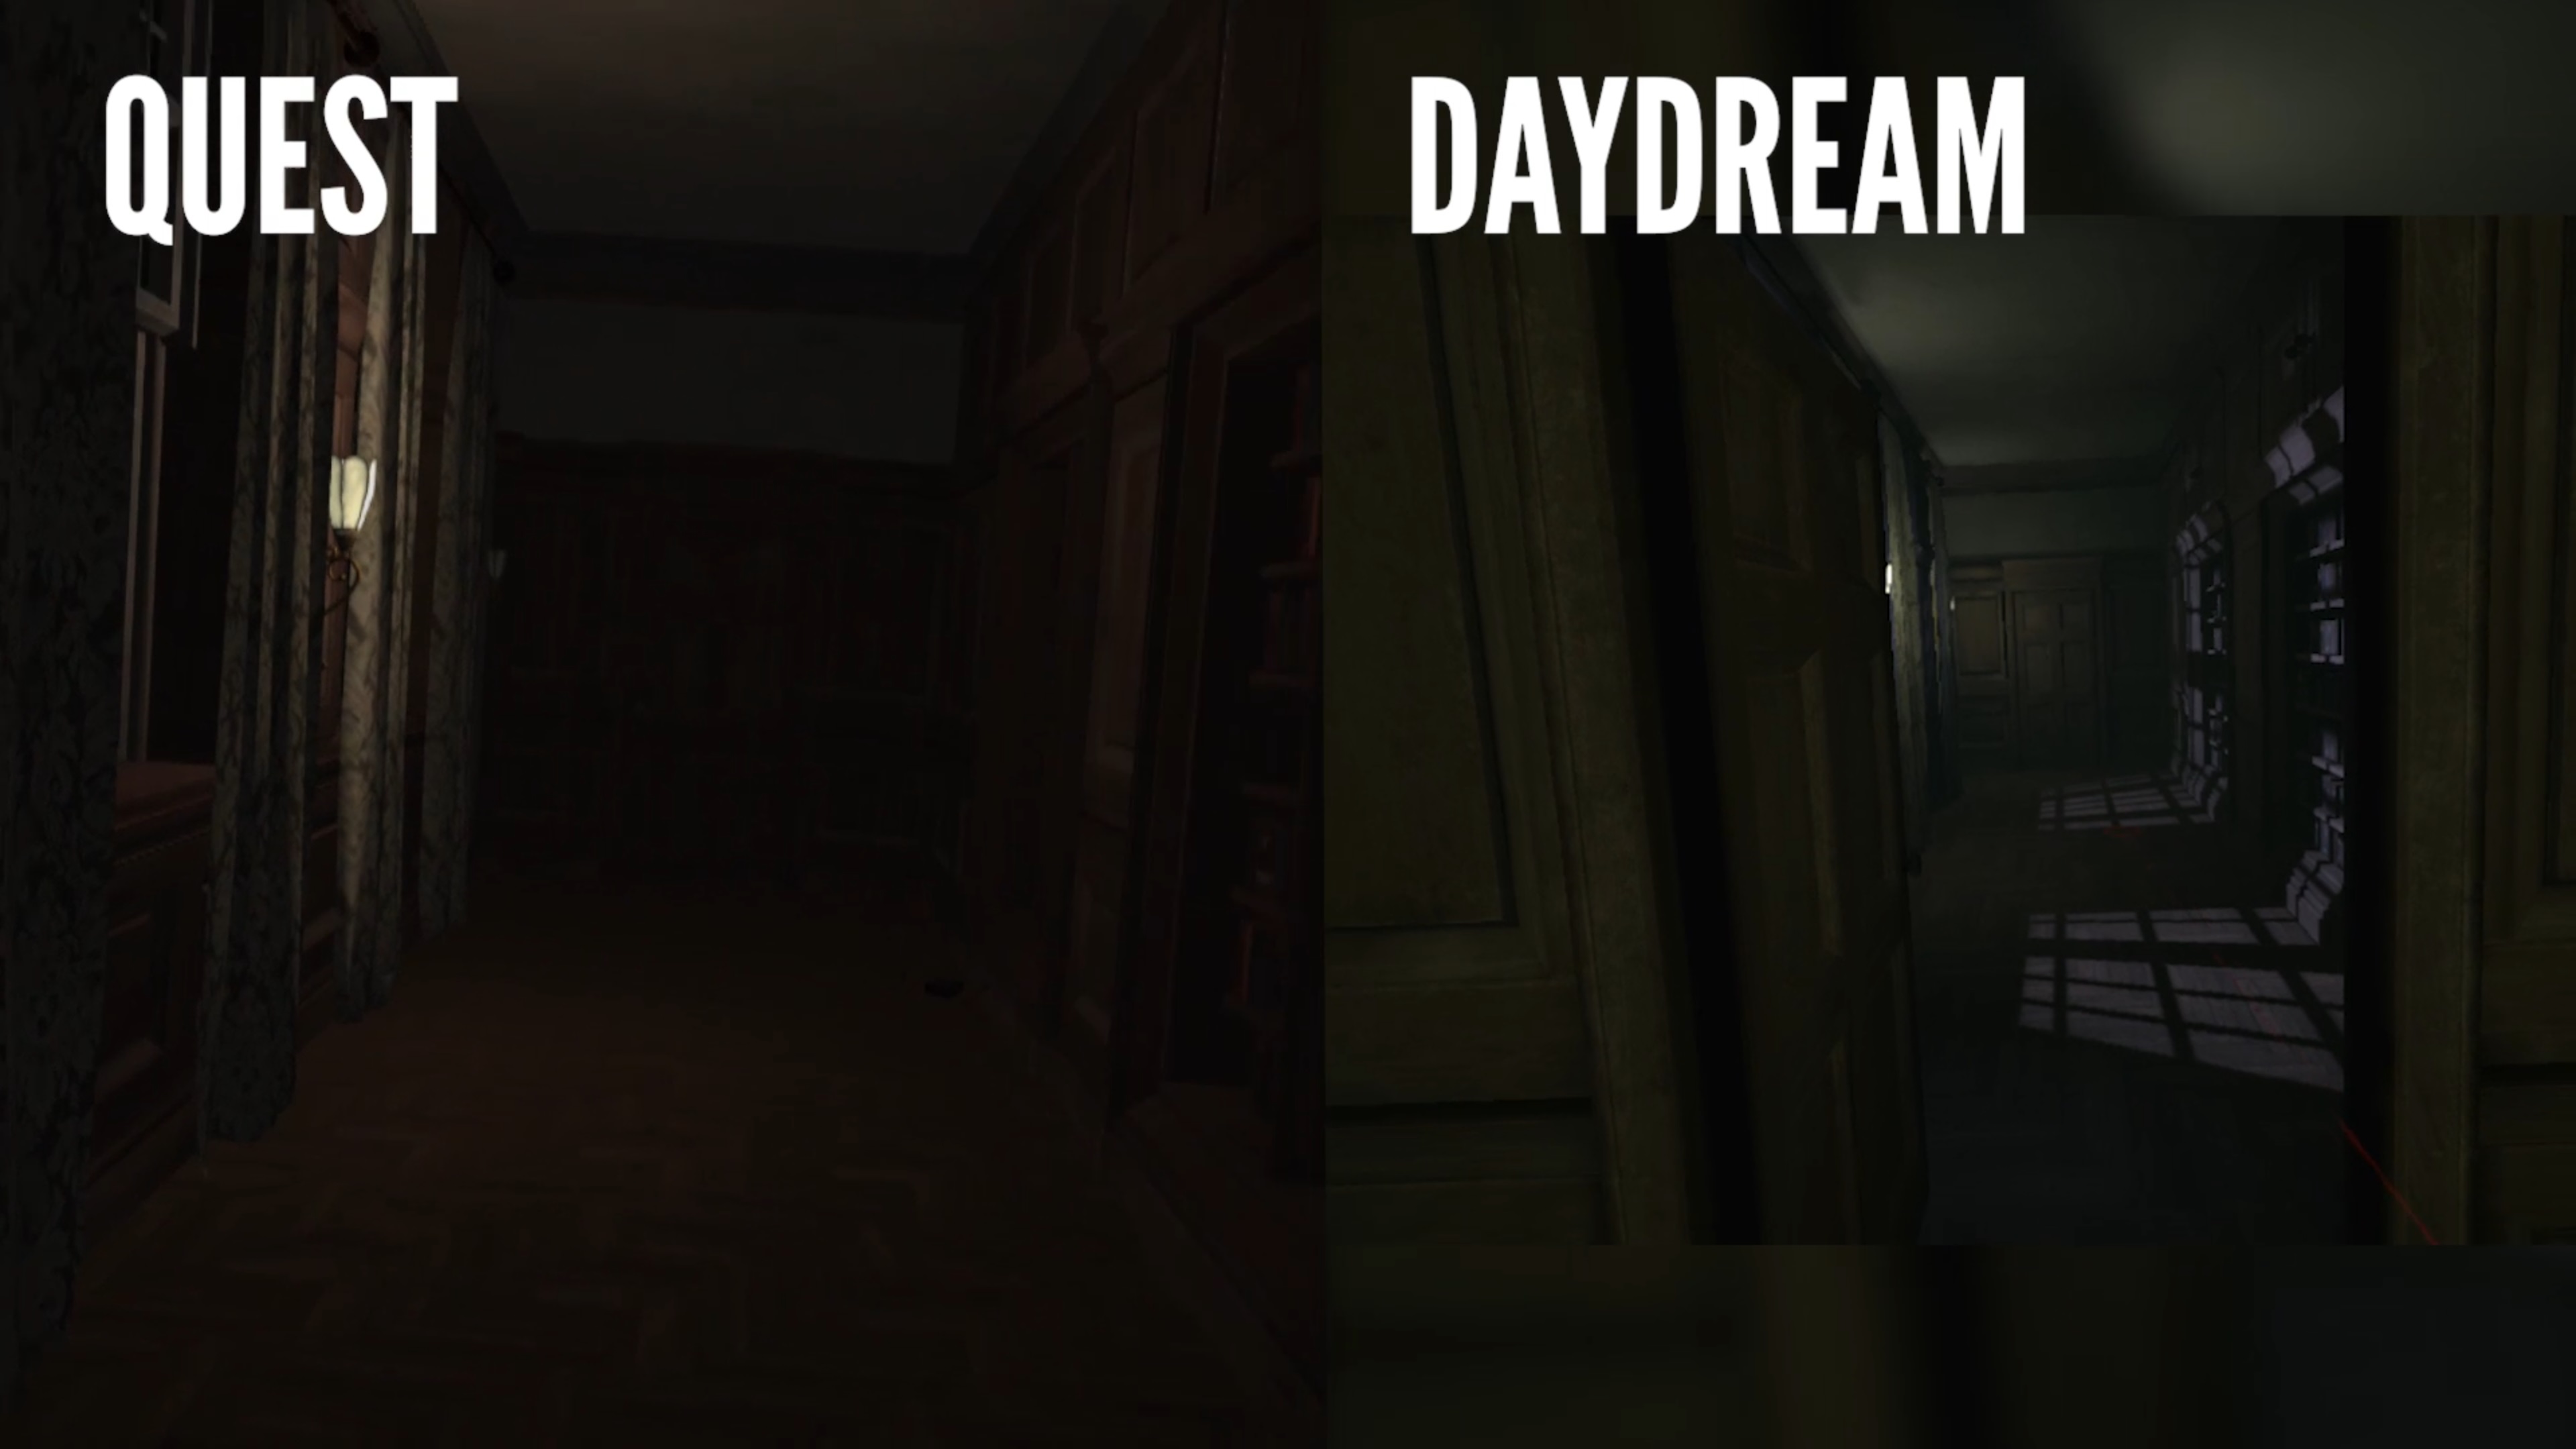 Layers of Fear Quest v Daydream